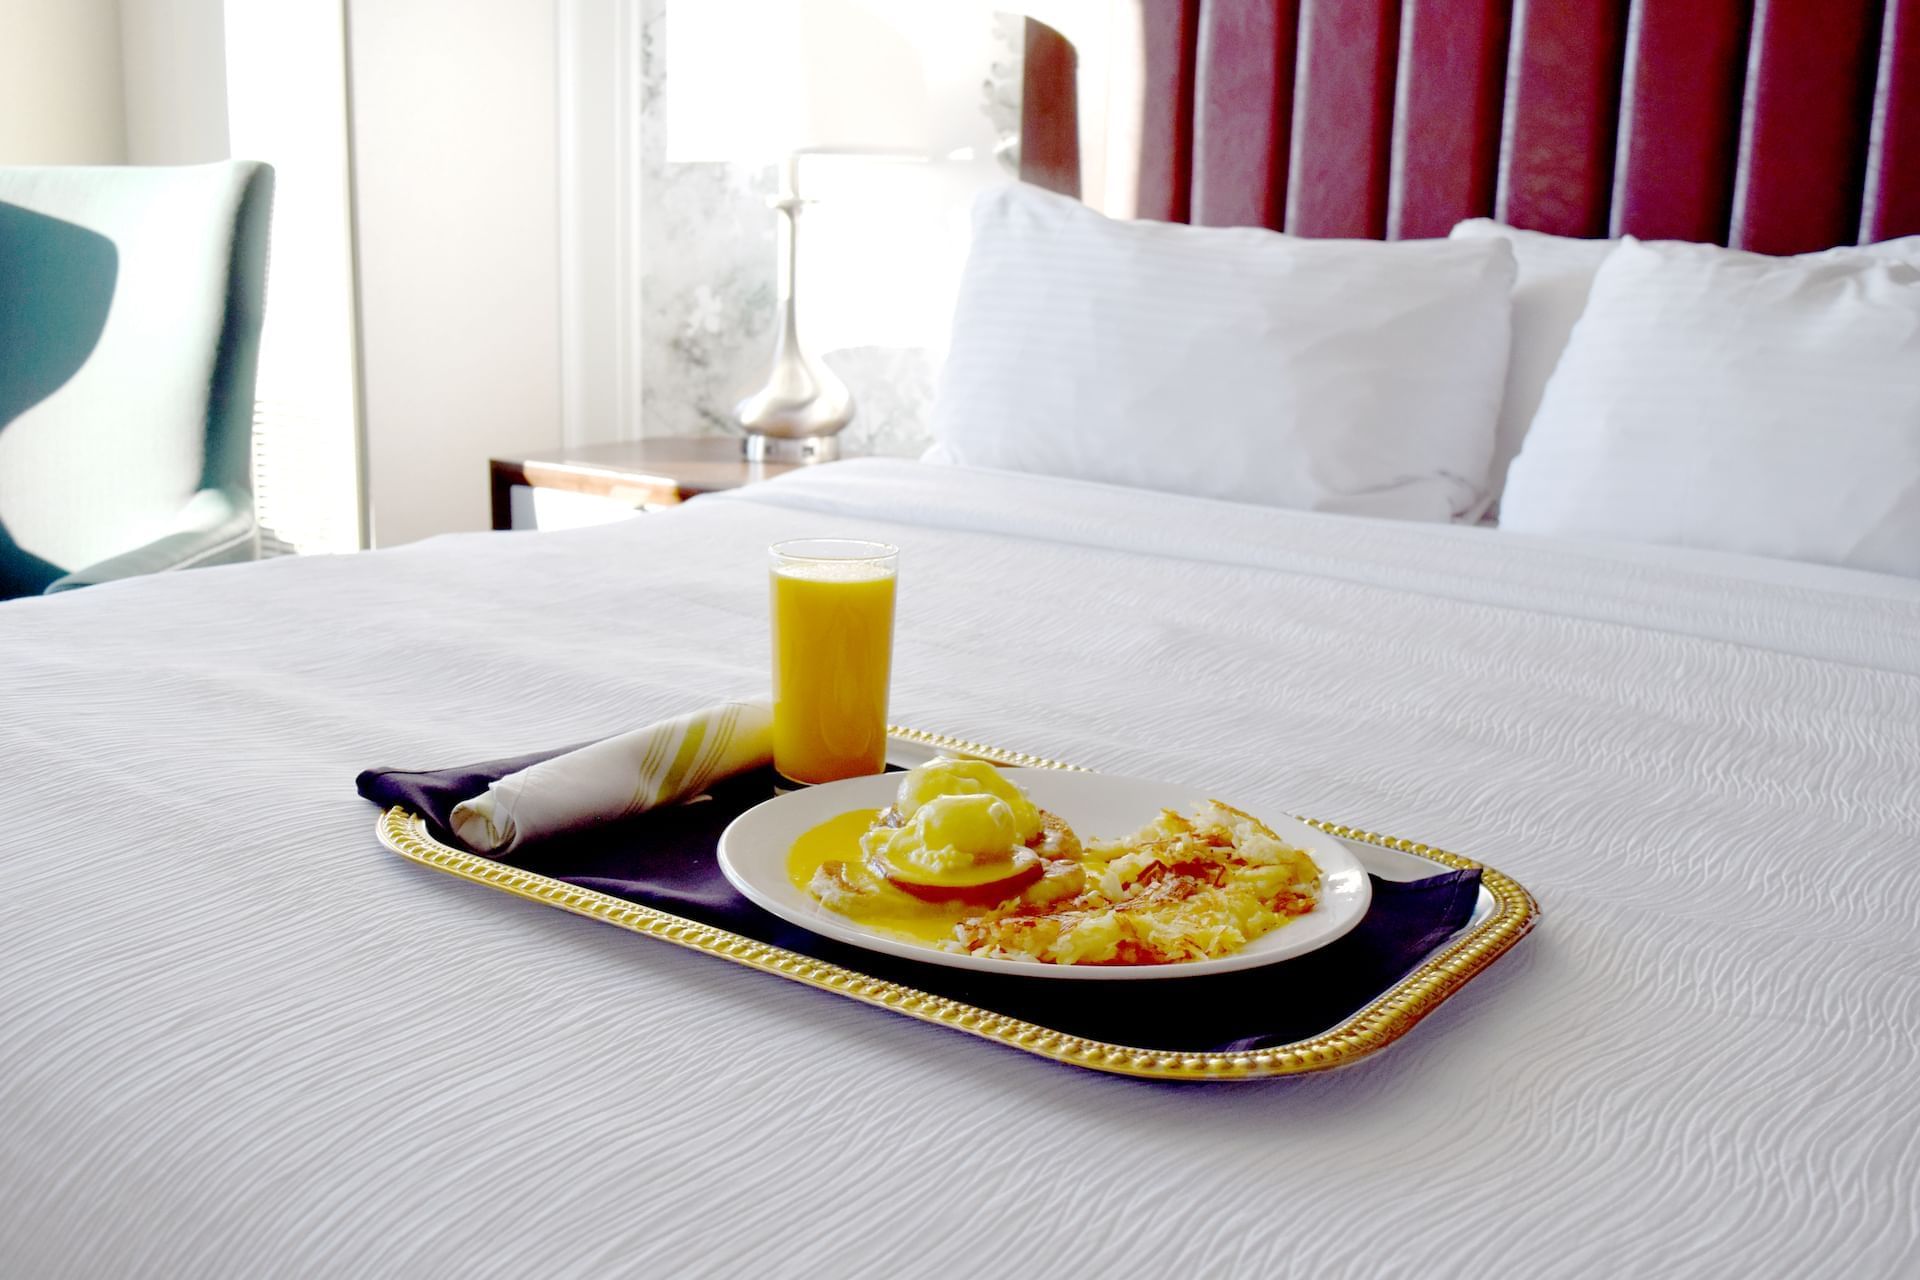 Breakfast served on a bed at The Grove Hotel